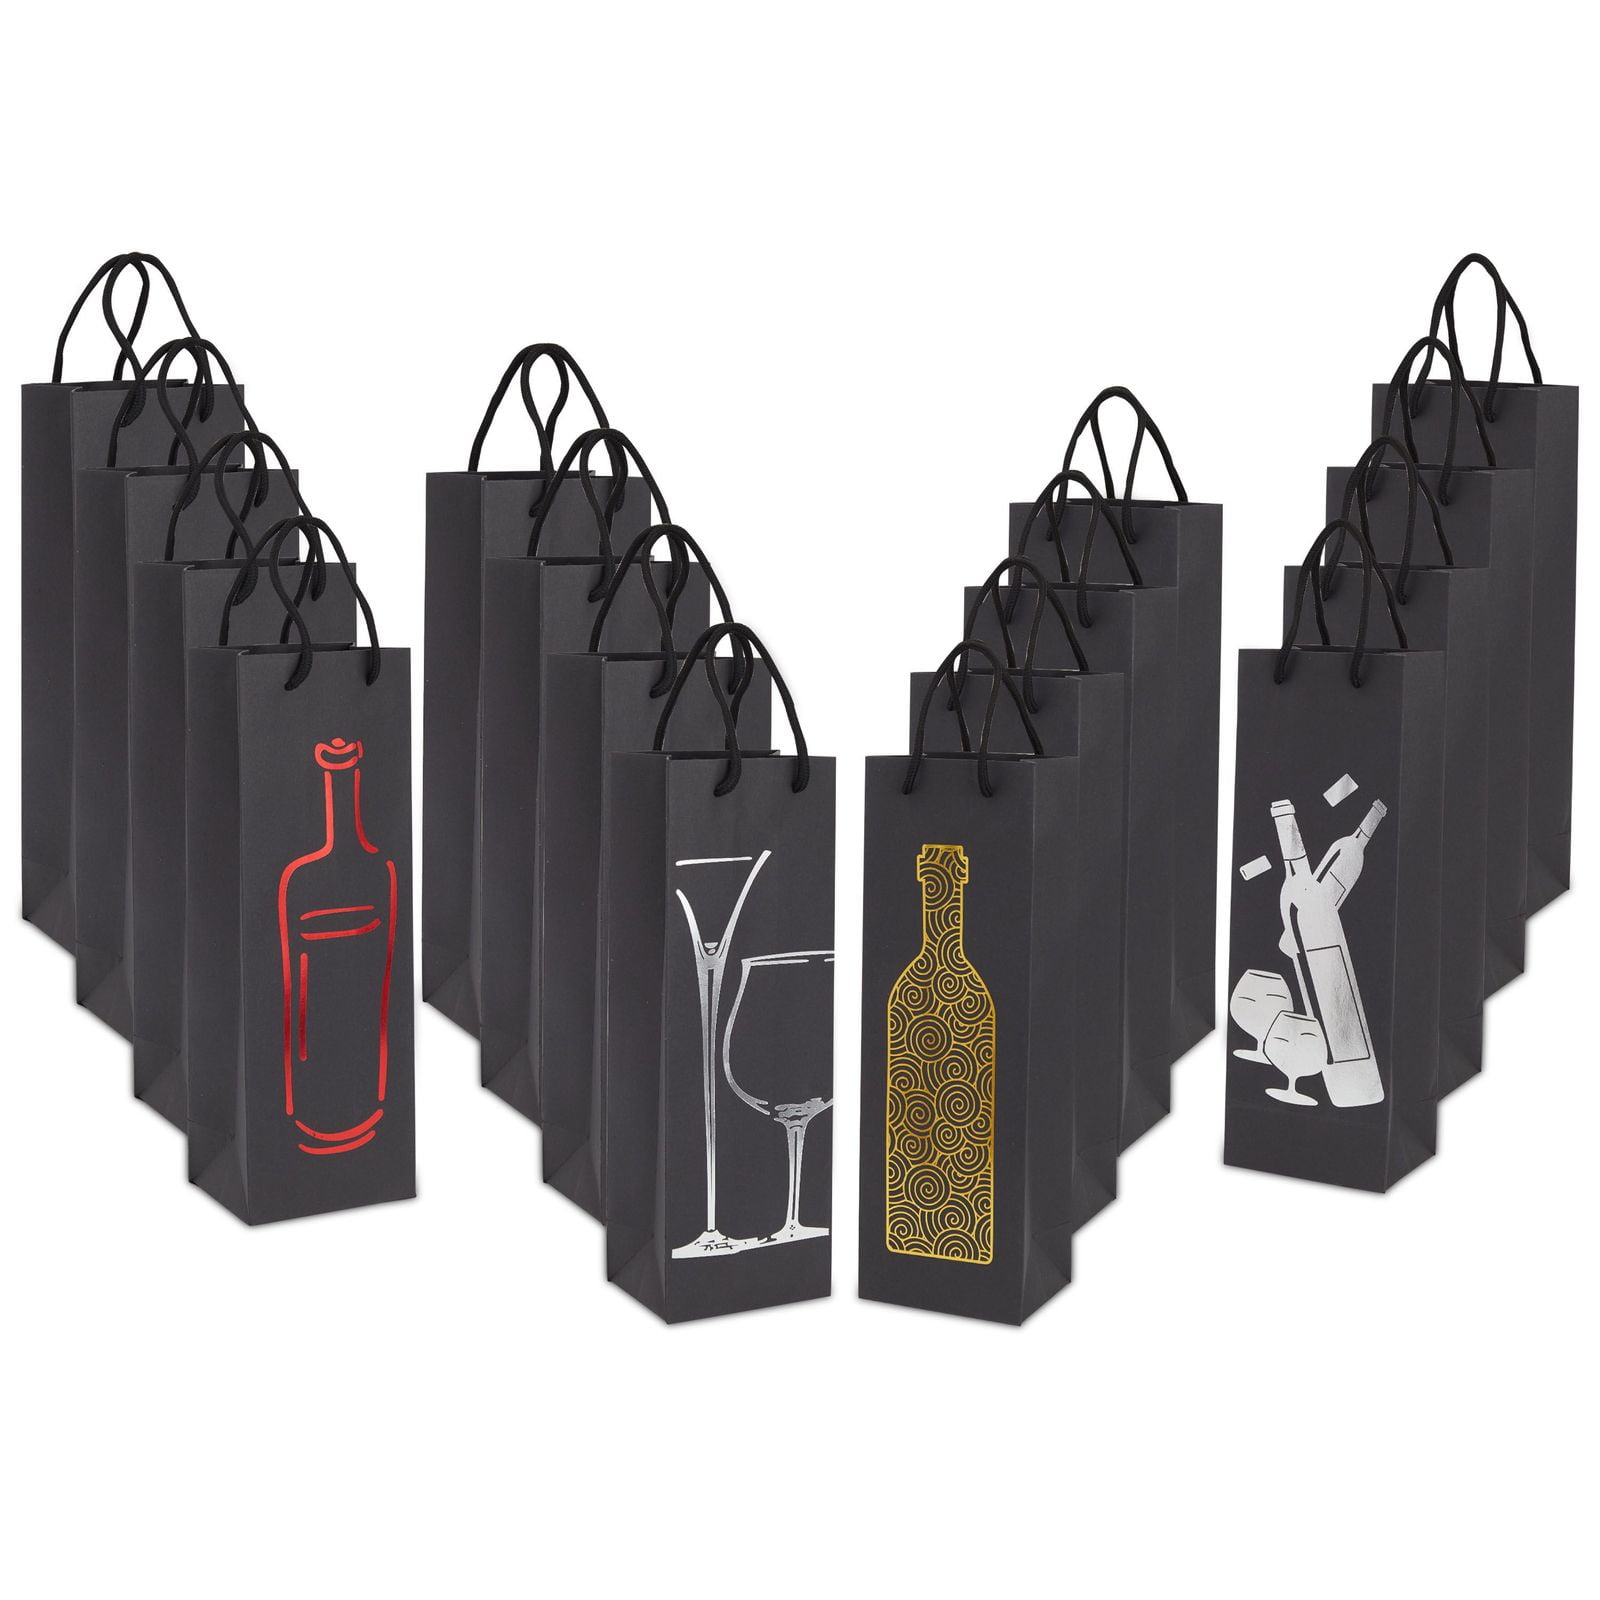 Gift Bags Wine Bottle Champagne Premium Paper Wrap Party Gift All Occasion X12 